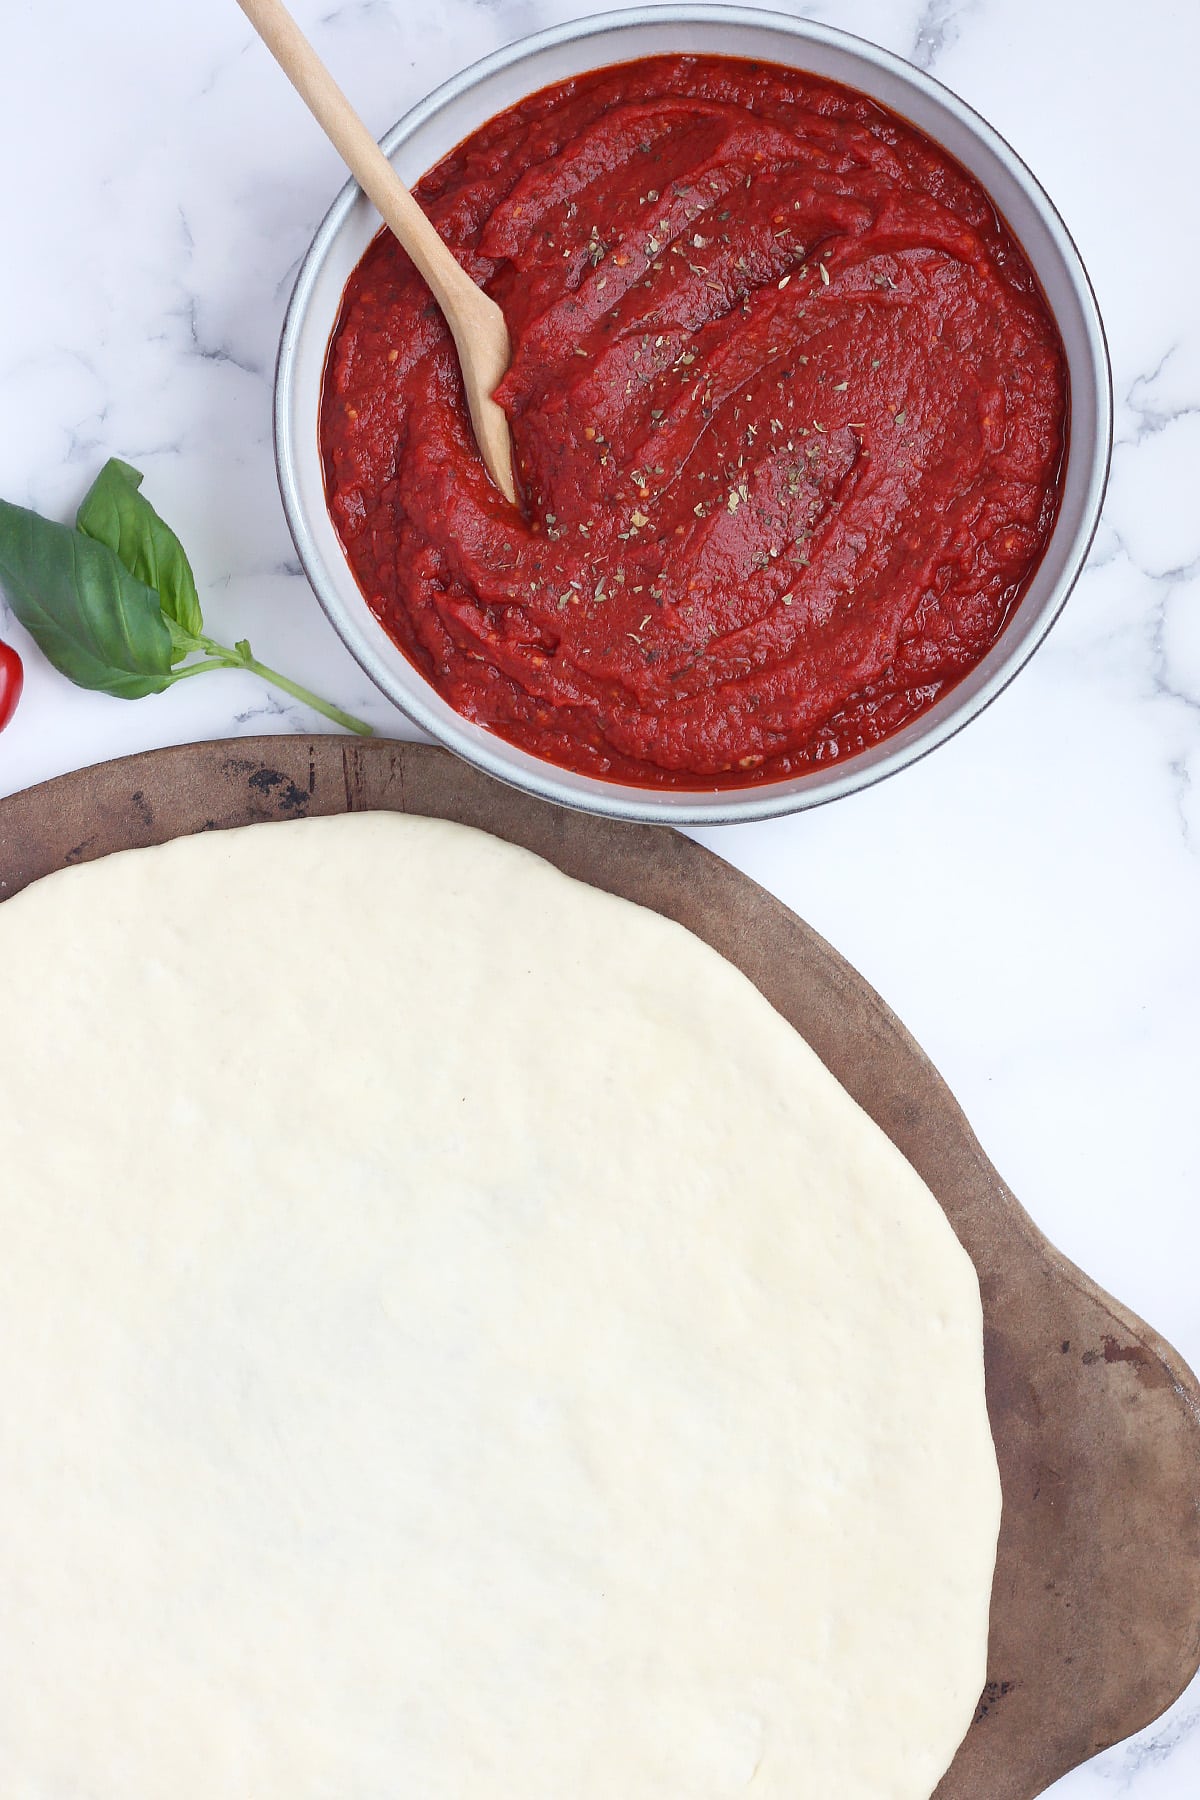 A bowl of pizza sauce near pizza dough rolled out onto a pizza stone.